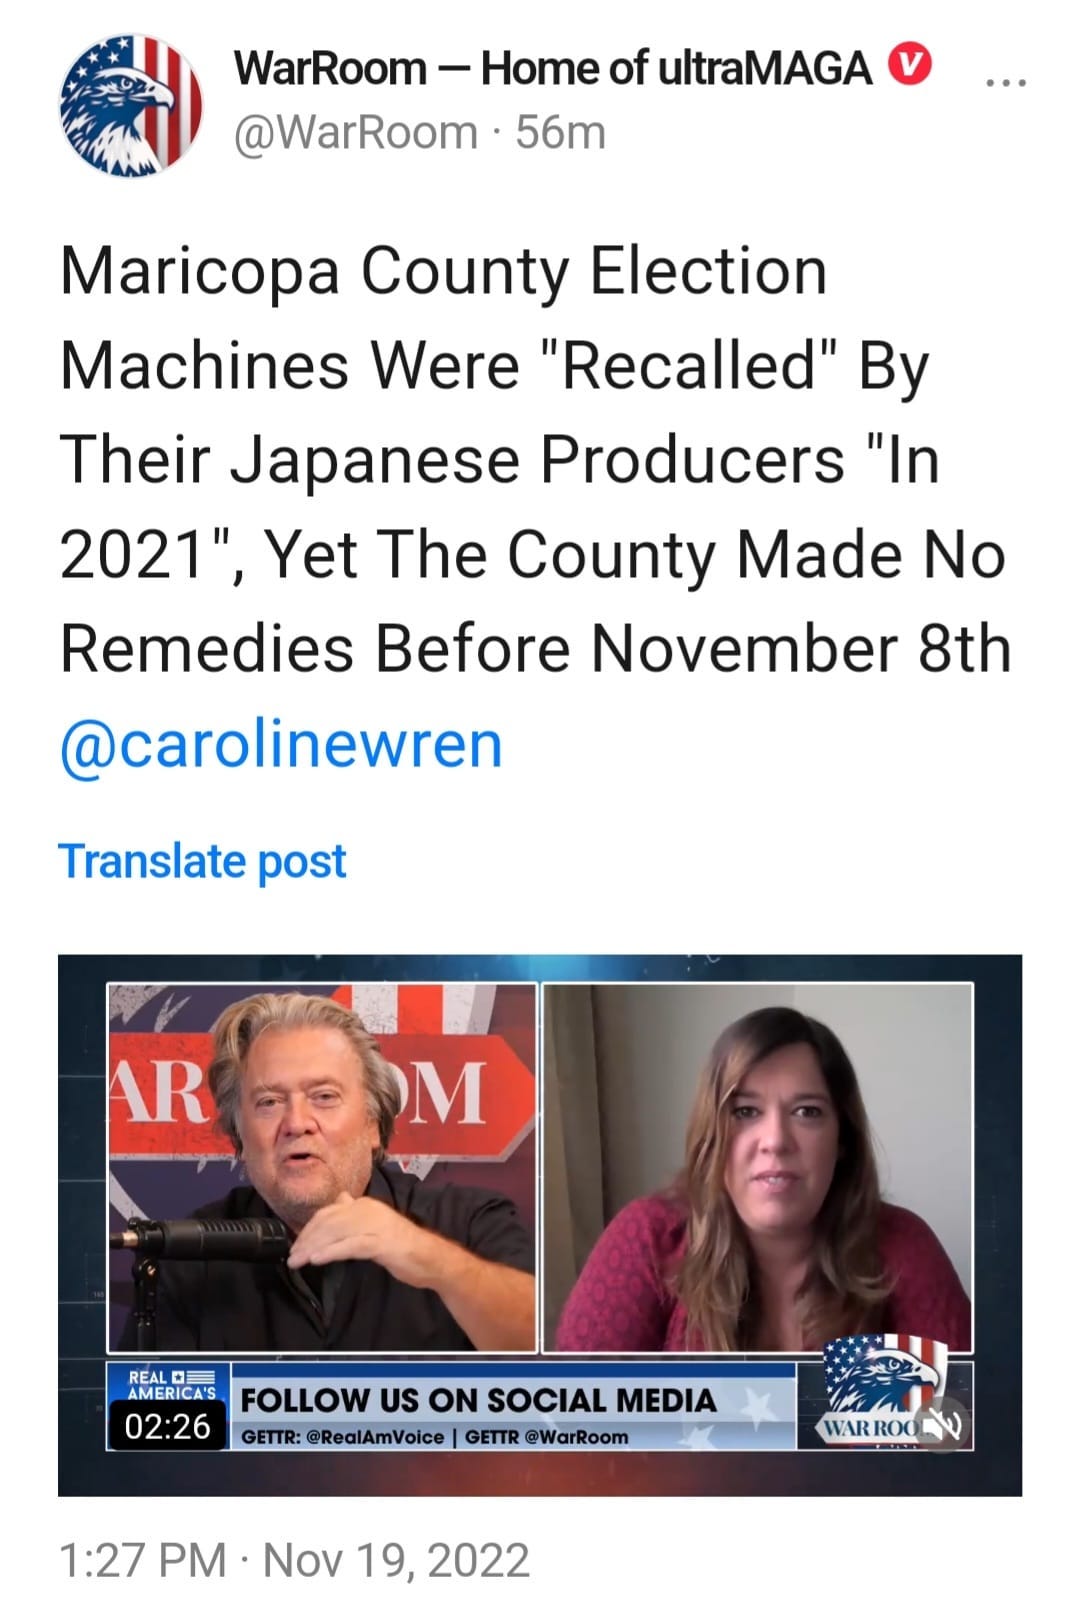 May be an image of 2 people and text that says 'WarRoom -Home of ultraMAGA @WarRoom 56m Maricopa County Election Machines Were "Recalled" By Their Japanese Producers "In 2021", Yet The County Made No Remedies Before November 8th @carolinewren Translate post AR M REAL AMERICA'S FOLLOW US ON SOCIAL MEDIA 02:26 GETTR: @RealAmVoice GETTR @WarRoom WARROO 1:27 PM Nov 19, 2022'